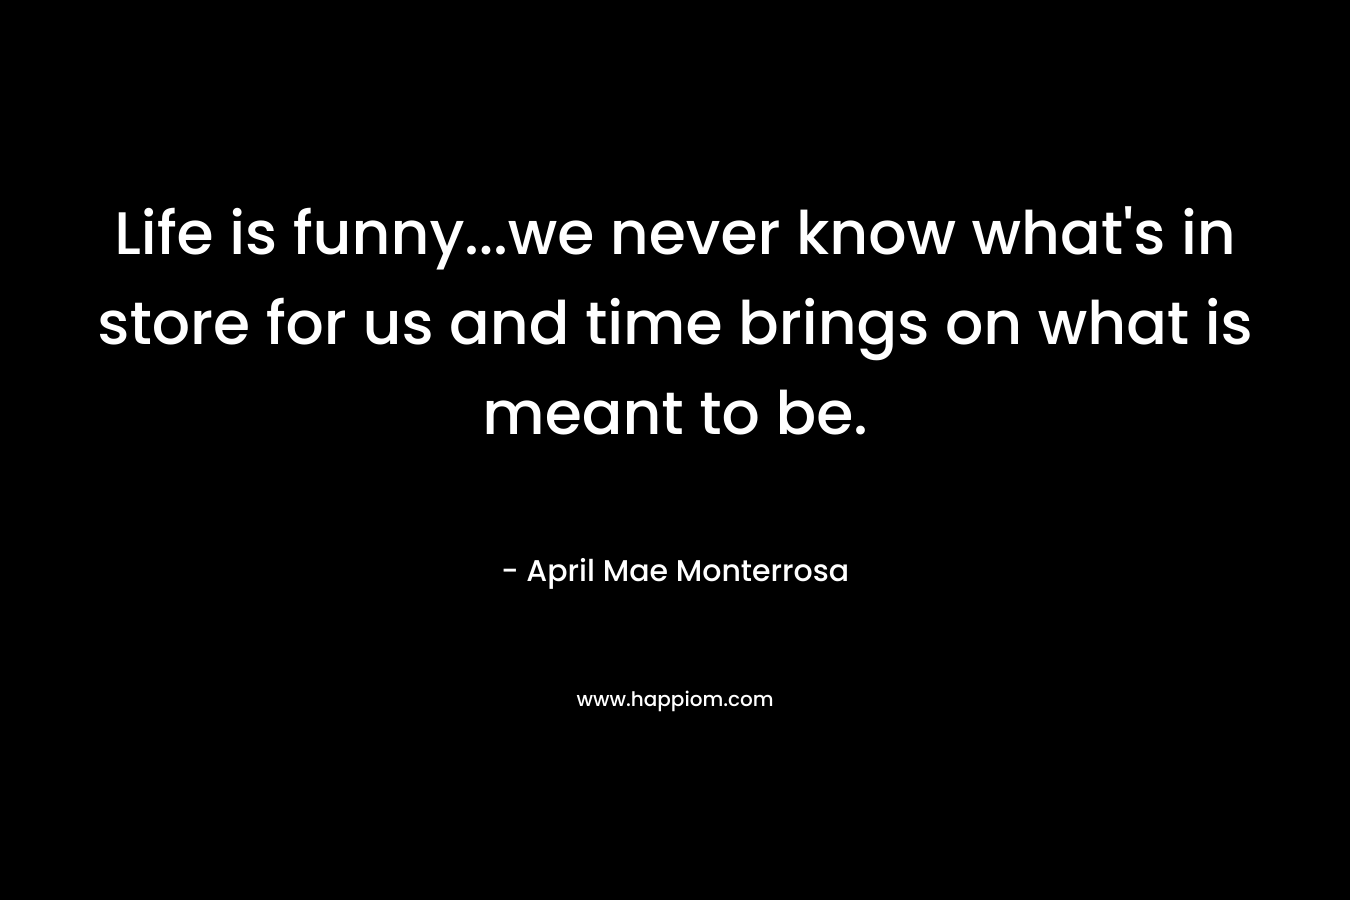 Life is funny...we never know what's in store for us and time brings on what is meant to be.